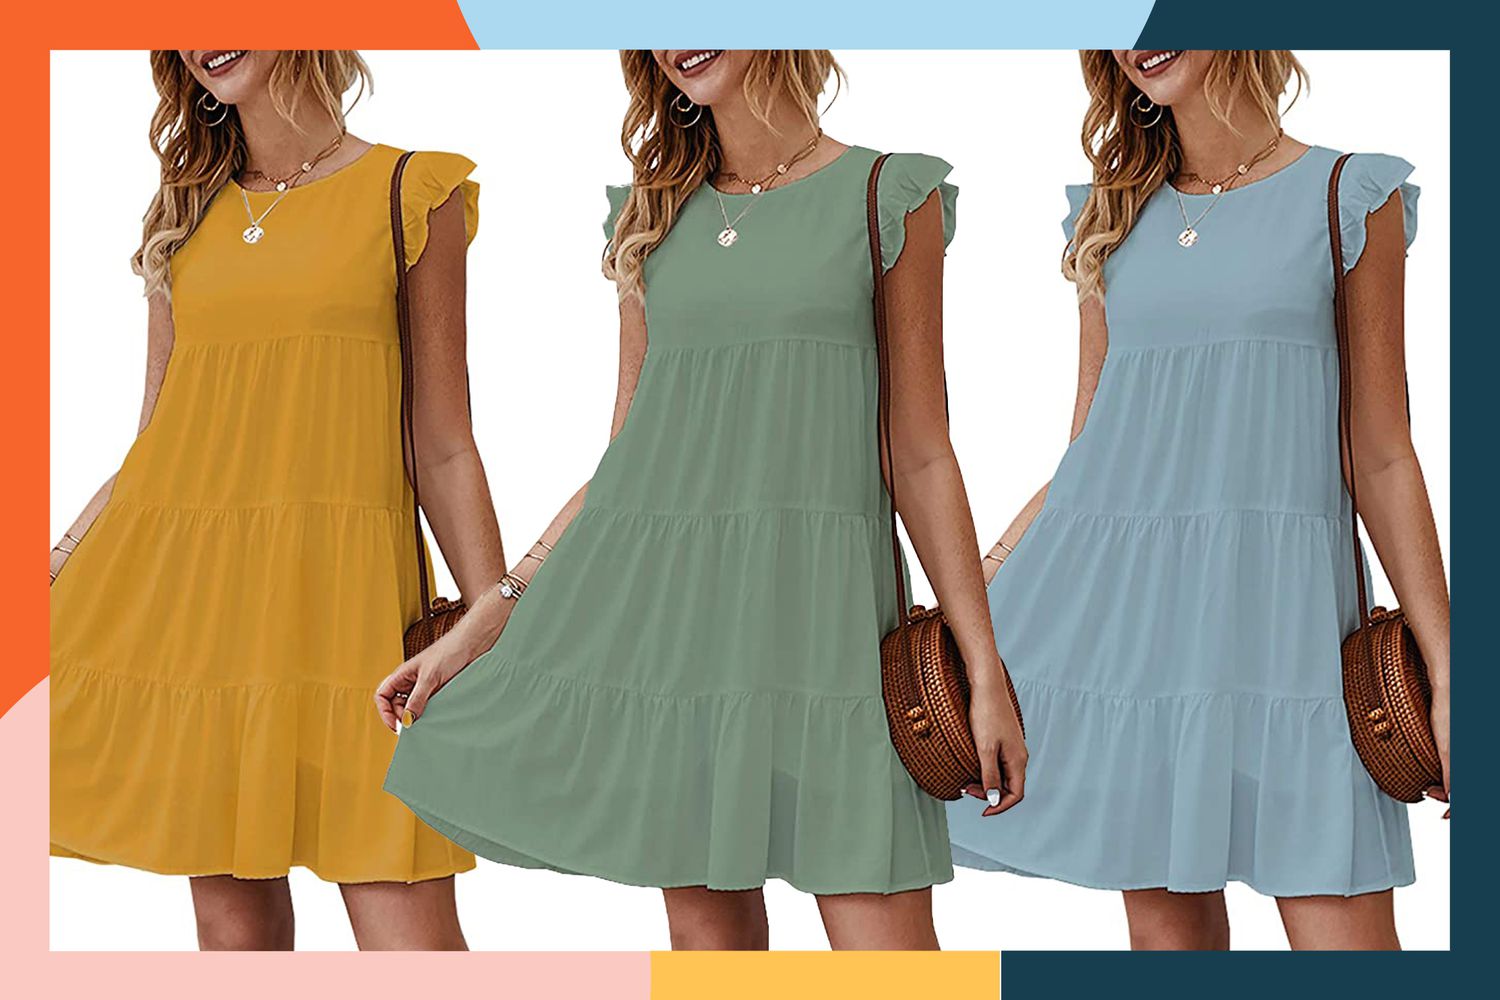 Shoppers Say This Airy Babydoll Dress Is 'Very Flattering,' and It's Trending on Amazon Right Now